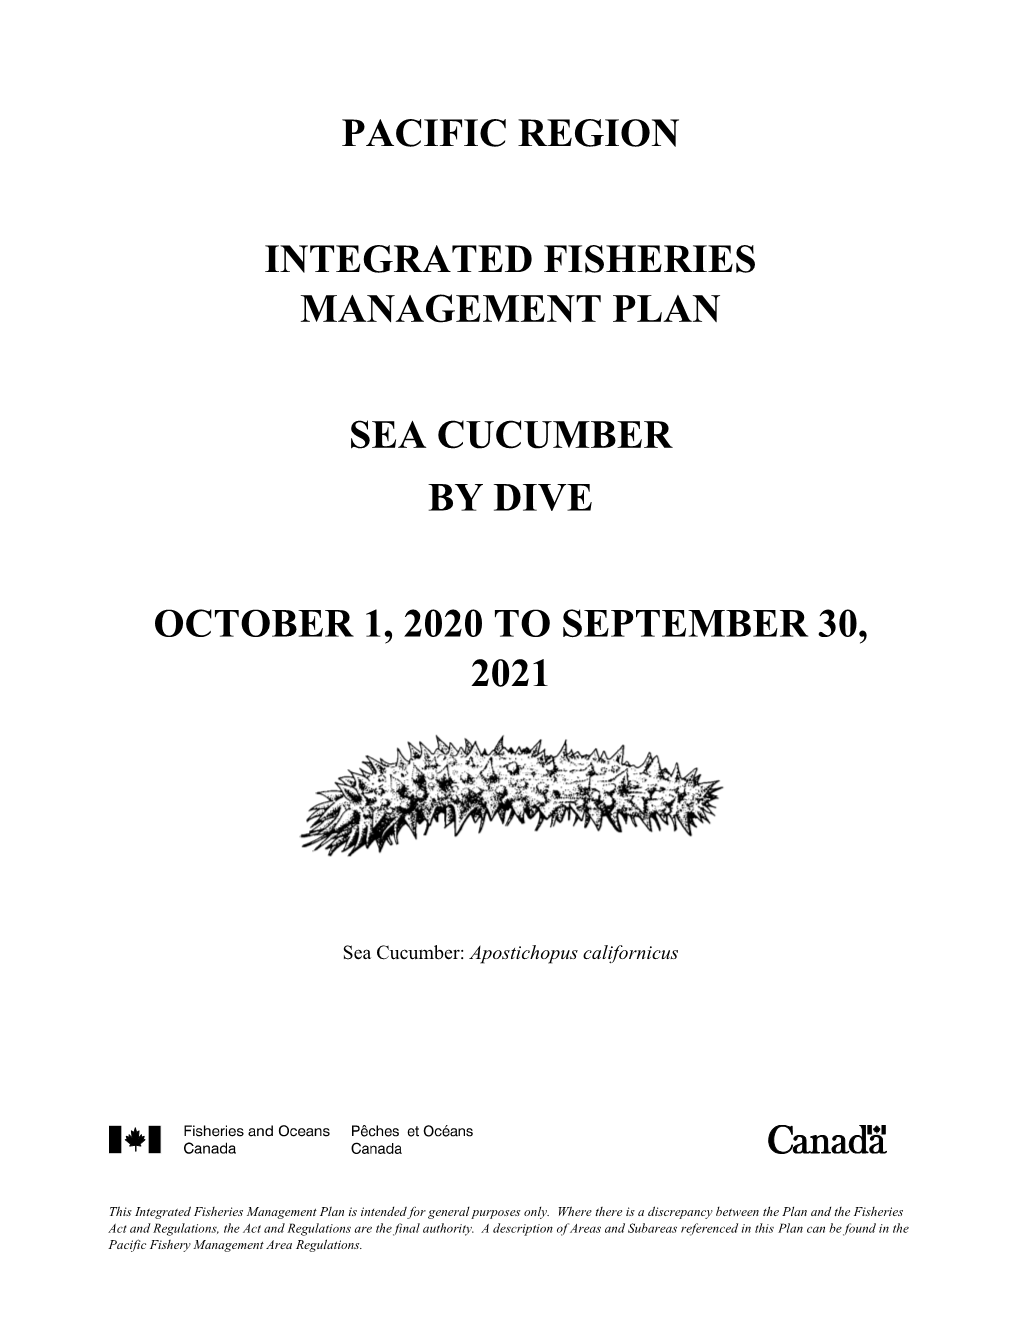 Pacific Region Integrated Fisheries Management Plan Sea Cucumber by Dive October 1, 2020 to September 30, 2021